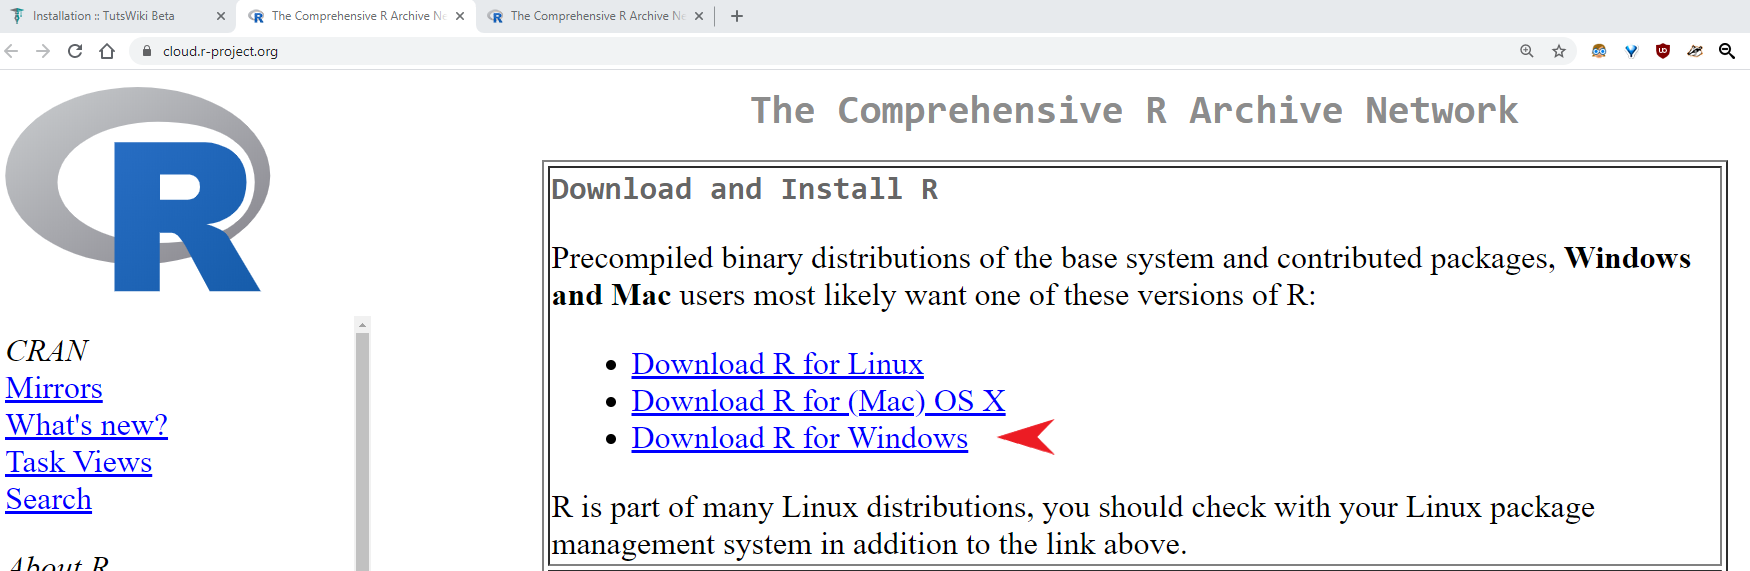 Download R for Windows